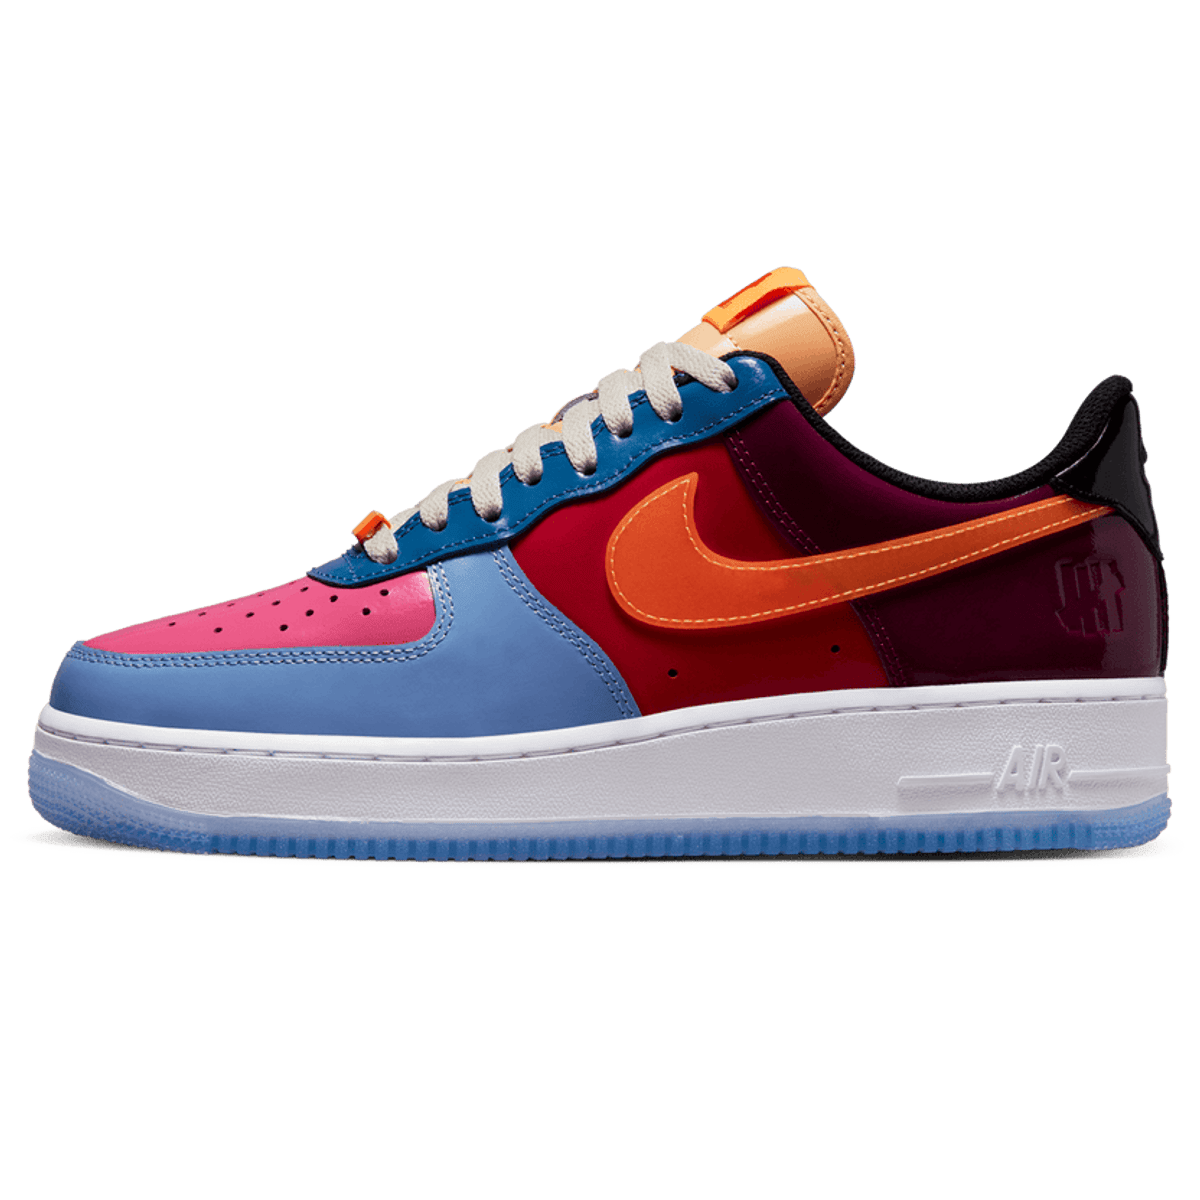 NIKE AIR FORCE 1 LOW SP UNDEFEATED 'TOTAL ORANGE'